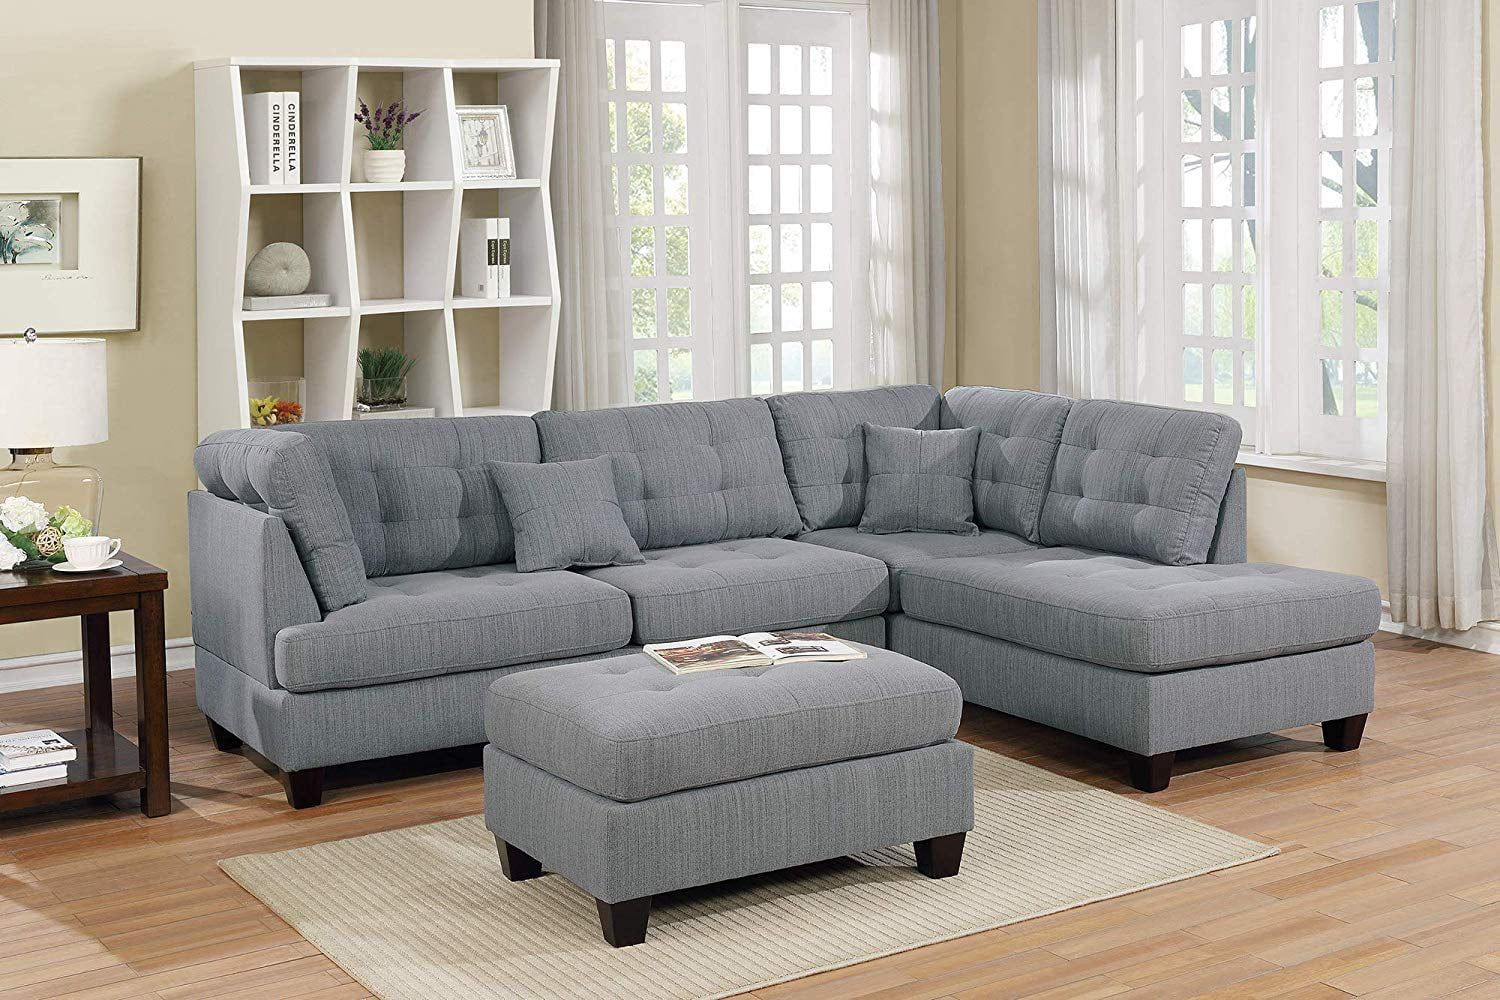 Modern Reversible Grey Linen Like Fabric Sectional Sofa Set With Tufted Regarding Gray Linen Sofas (Gallery 14 of 20)